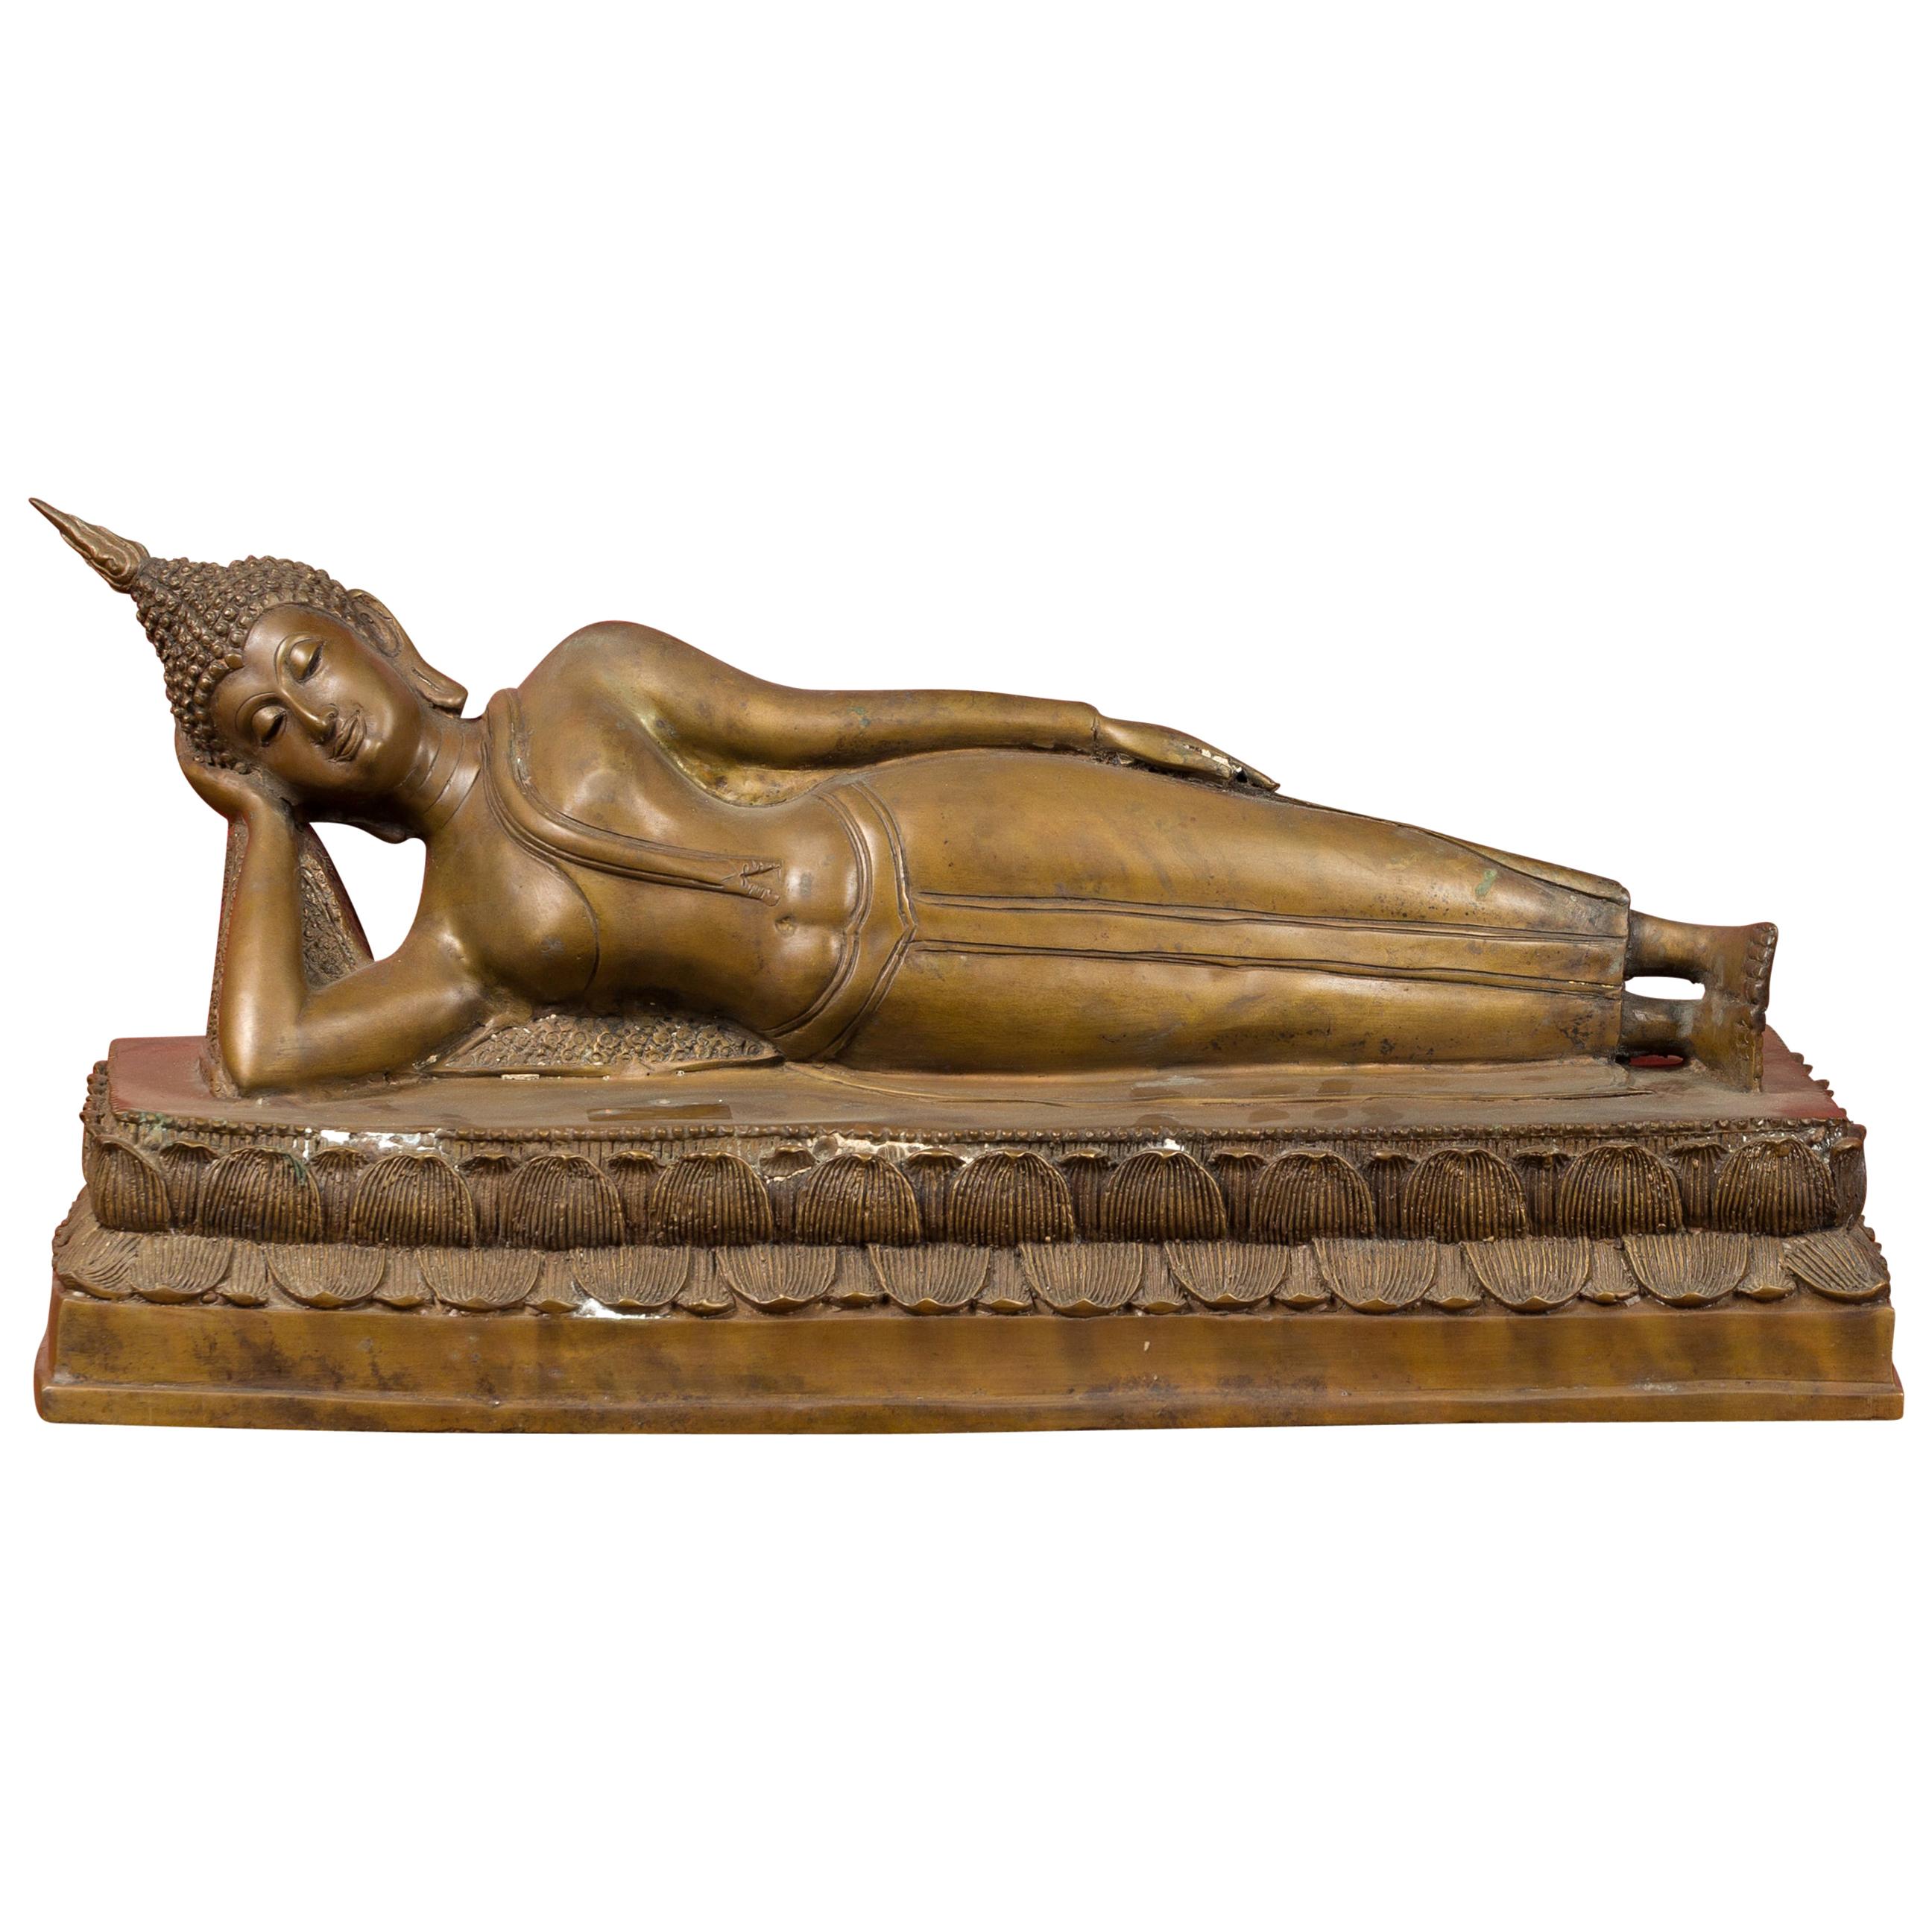 Vintage Thai Bronze Reclining Buddha Sculpture on Base with Lost Wax Technique